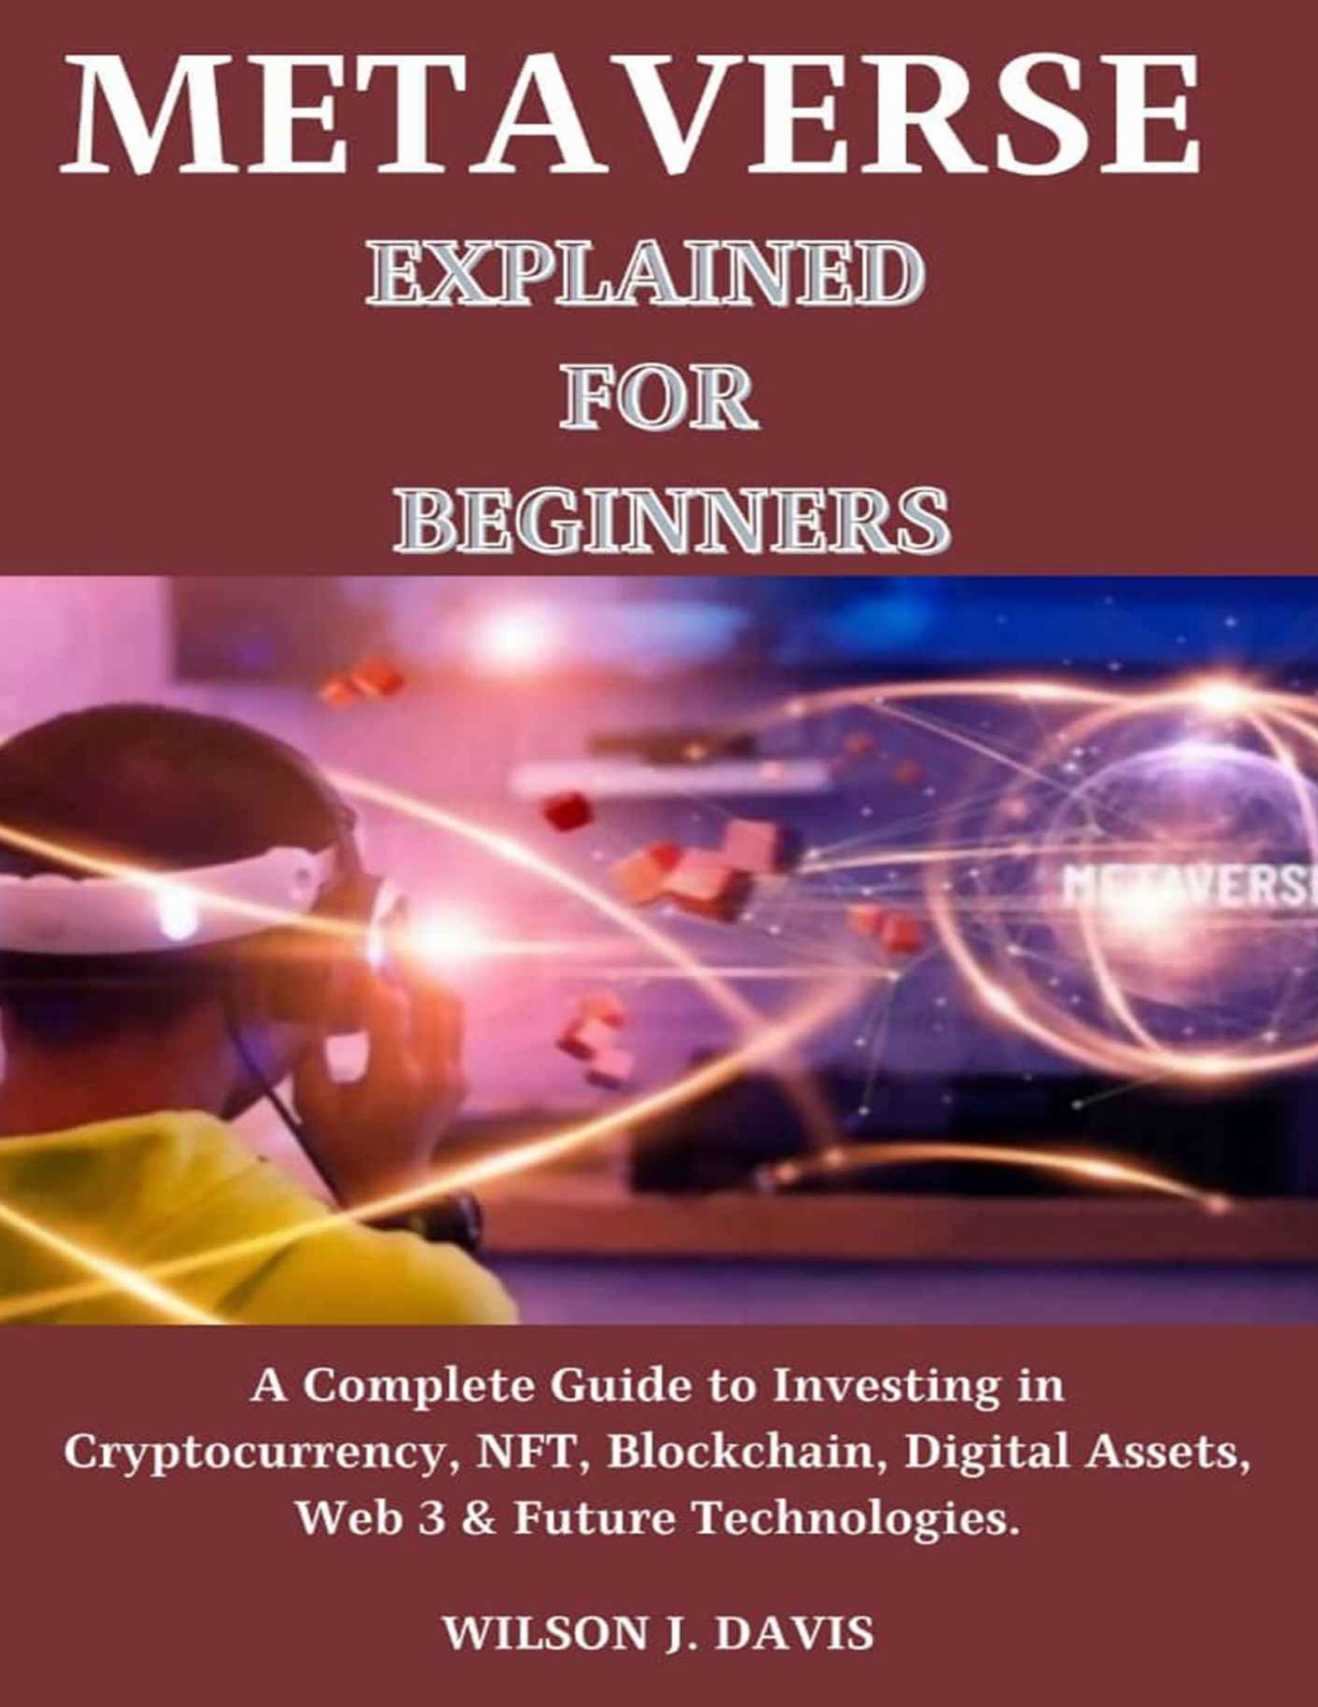 Metaverse Explained for Beginners: A Complete Guide to Investing in Cryptocurrency, NFT, Blockchain, Digital Assets, Web 3 & Future Technologies